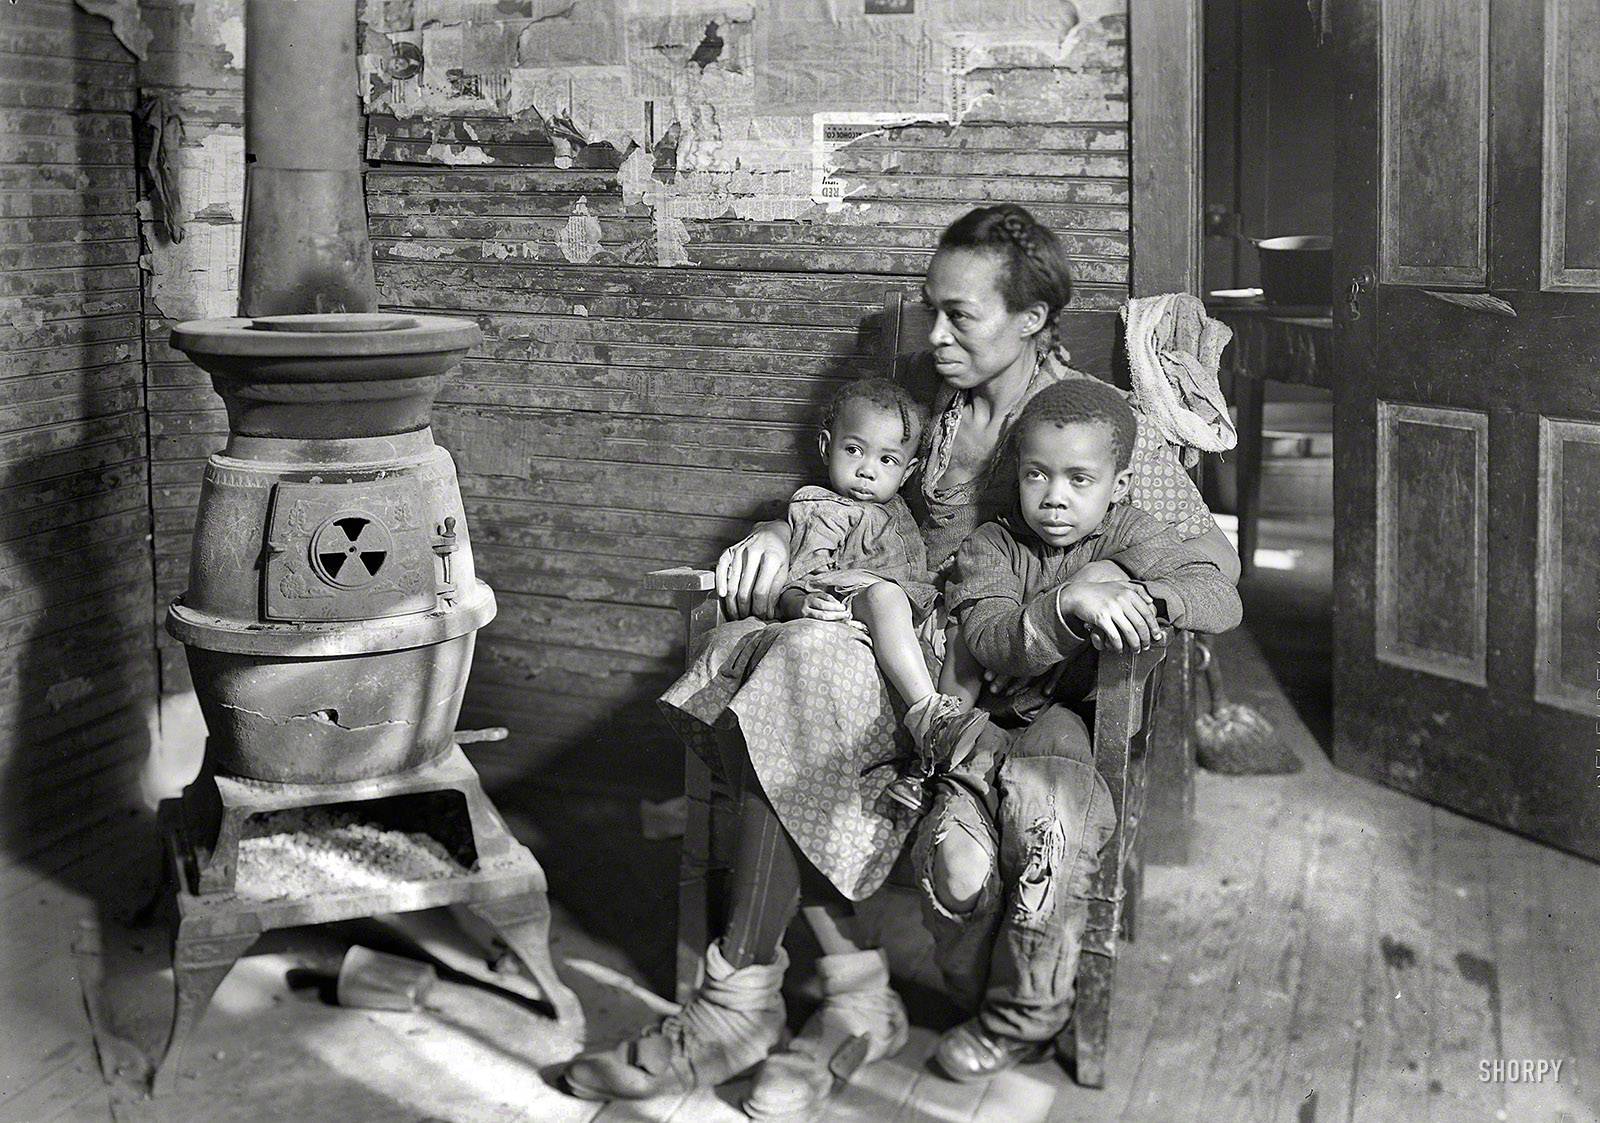 March 1937. Scott's Run, West Virginia. "Johnson family -- father unemployed." Photograph by Lewis Wickes Hine. View full size.